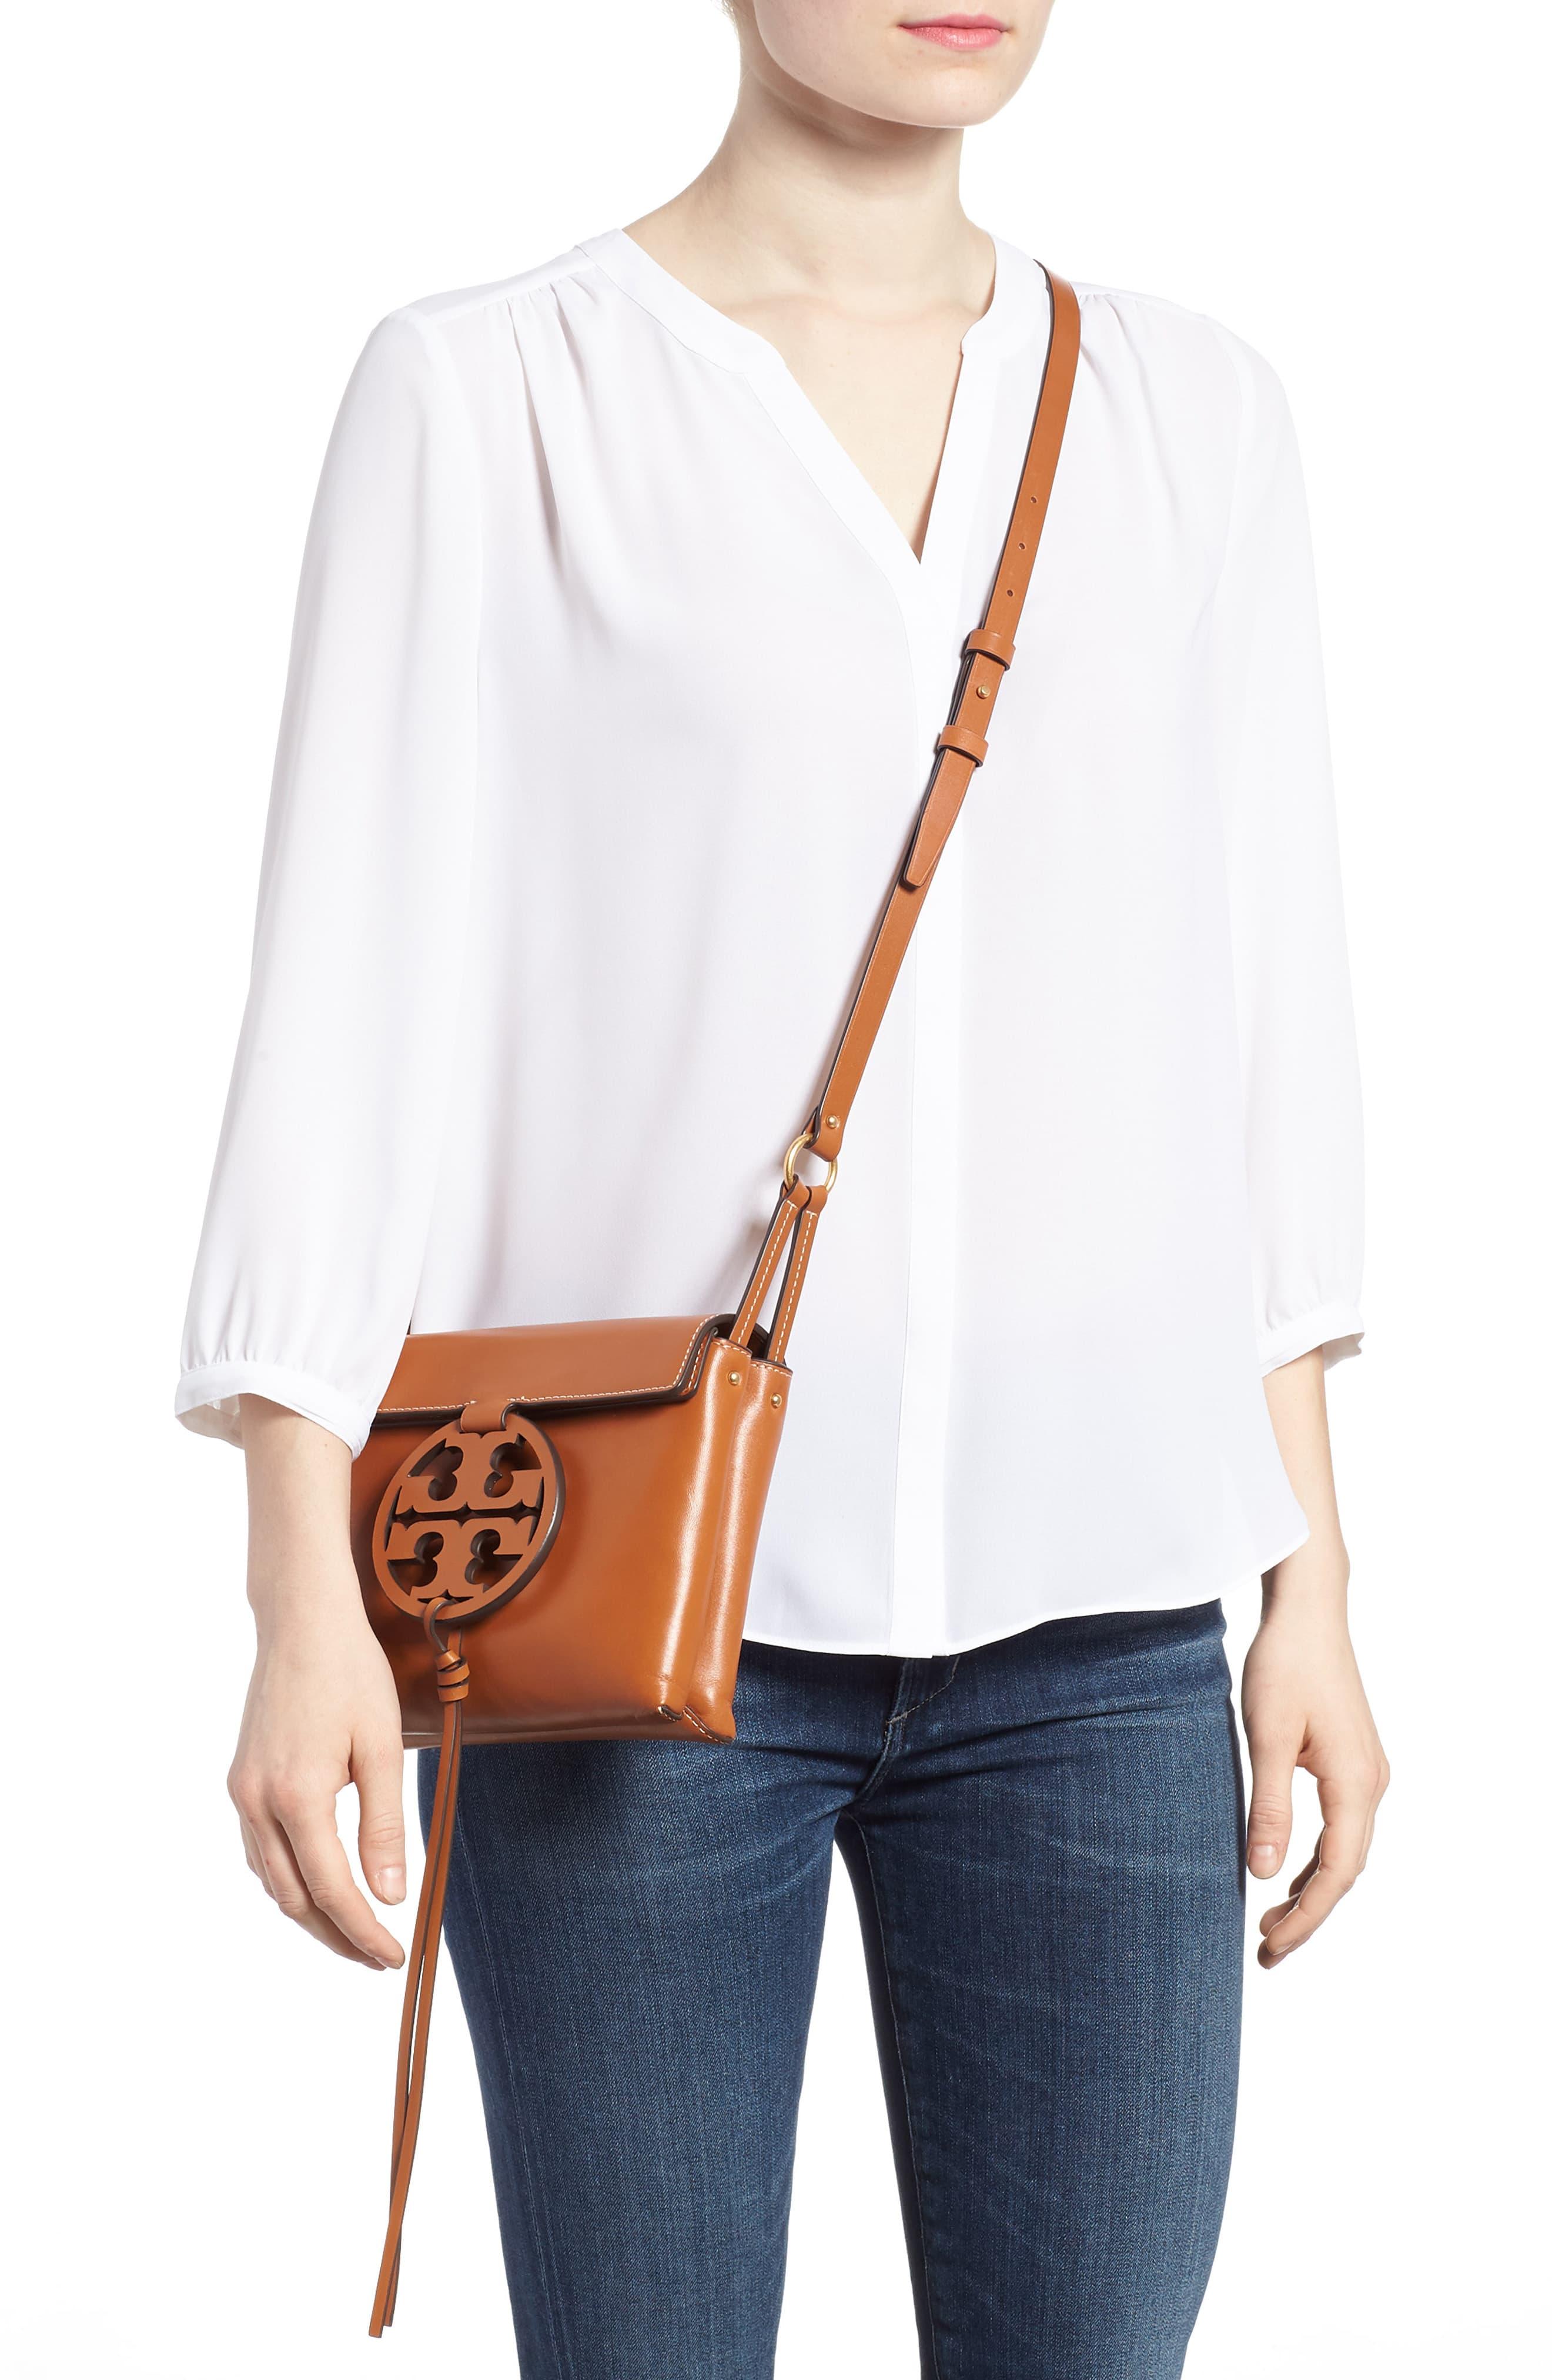 Tory Burch Miller Leather Crossbody Bag in Brown - Lyst